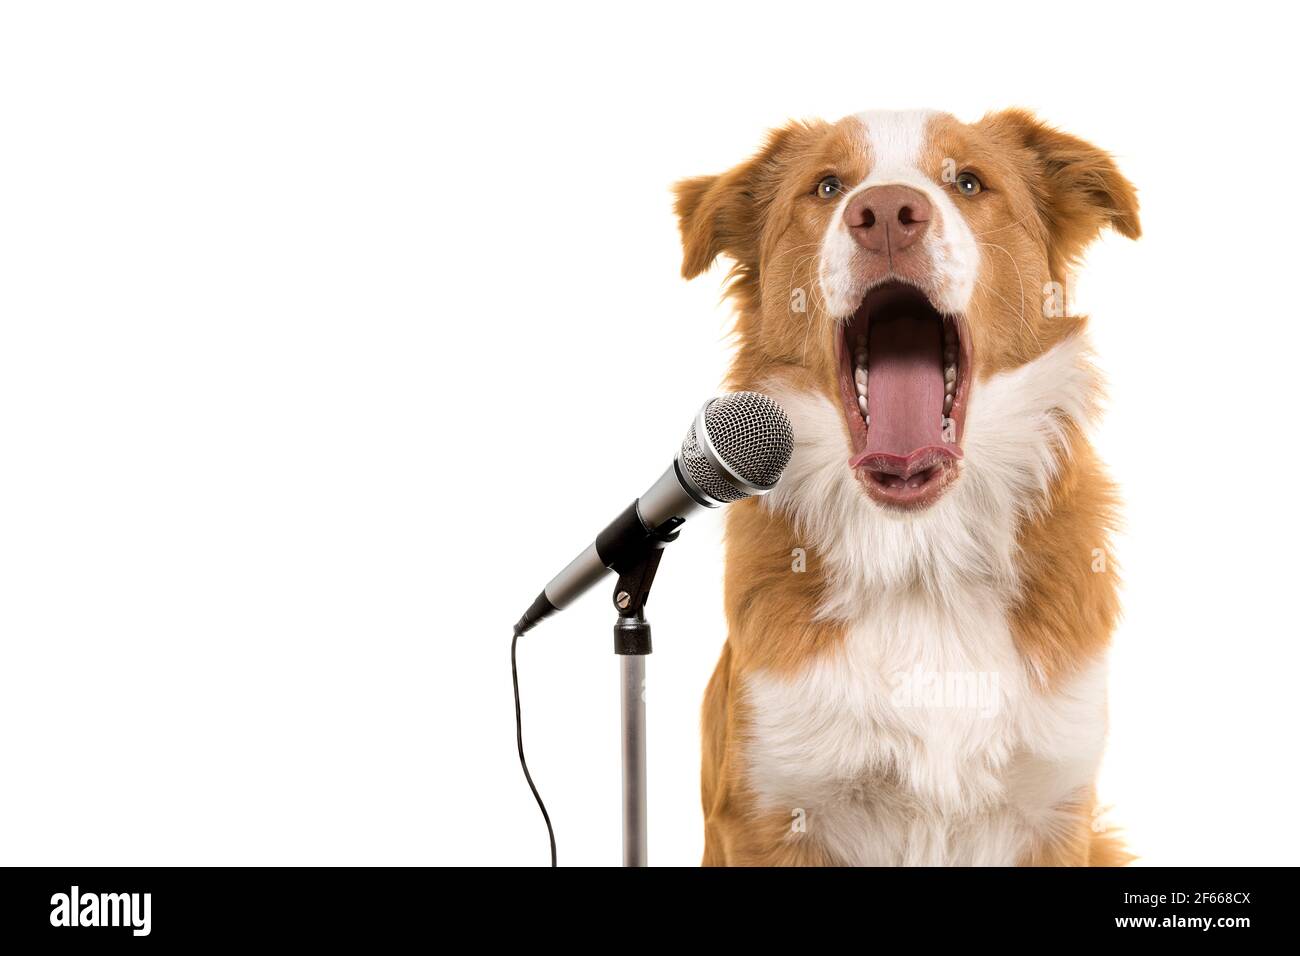 Portrait of a border collie dog singing in front a microphone Stock Photo